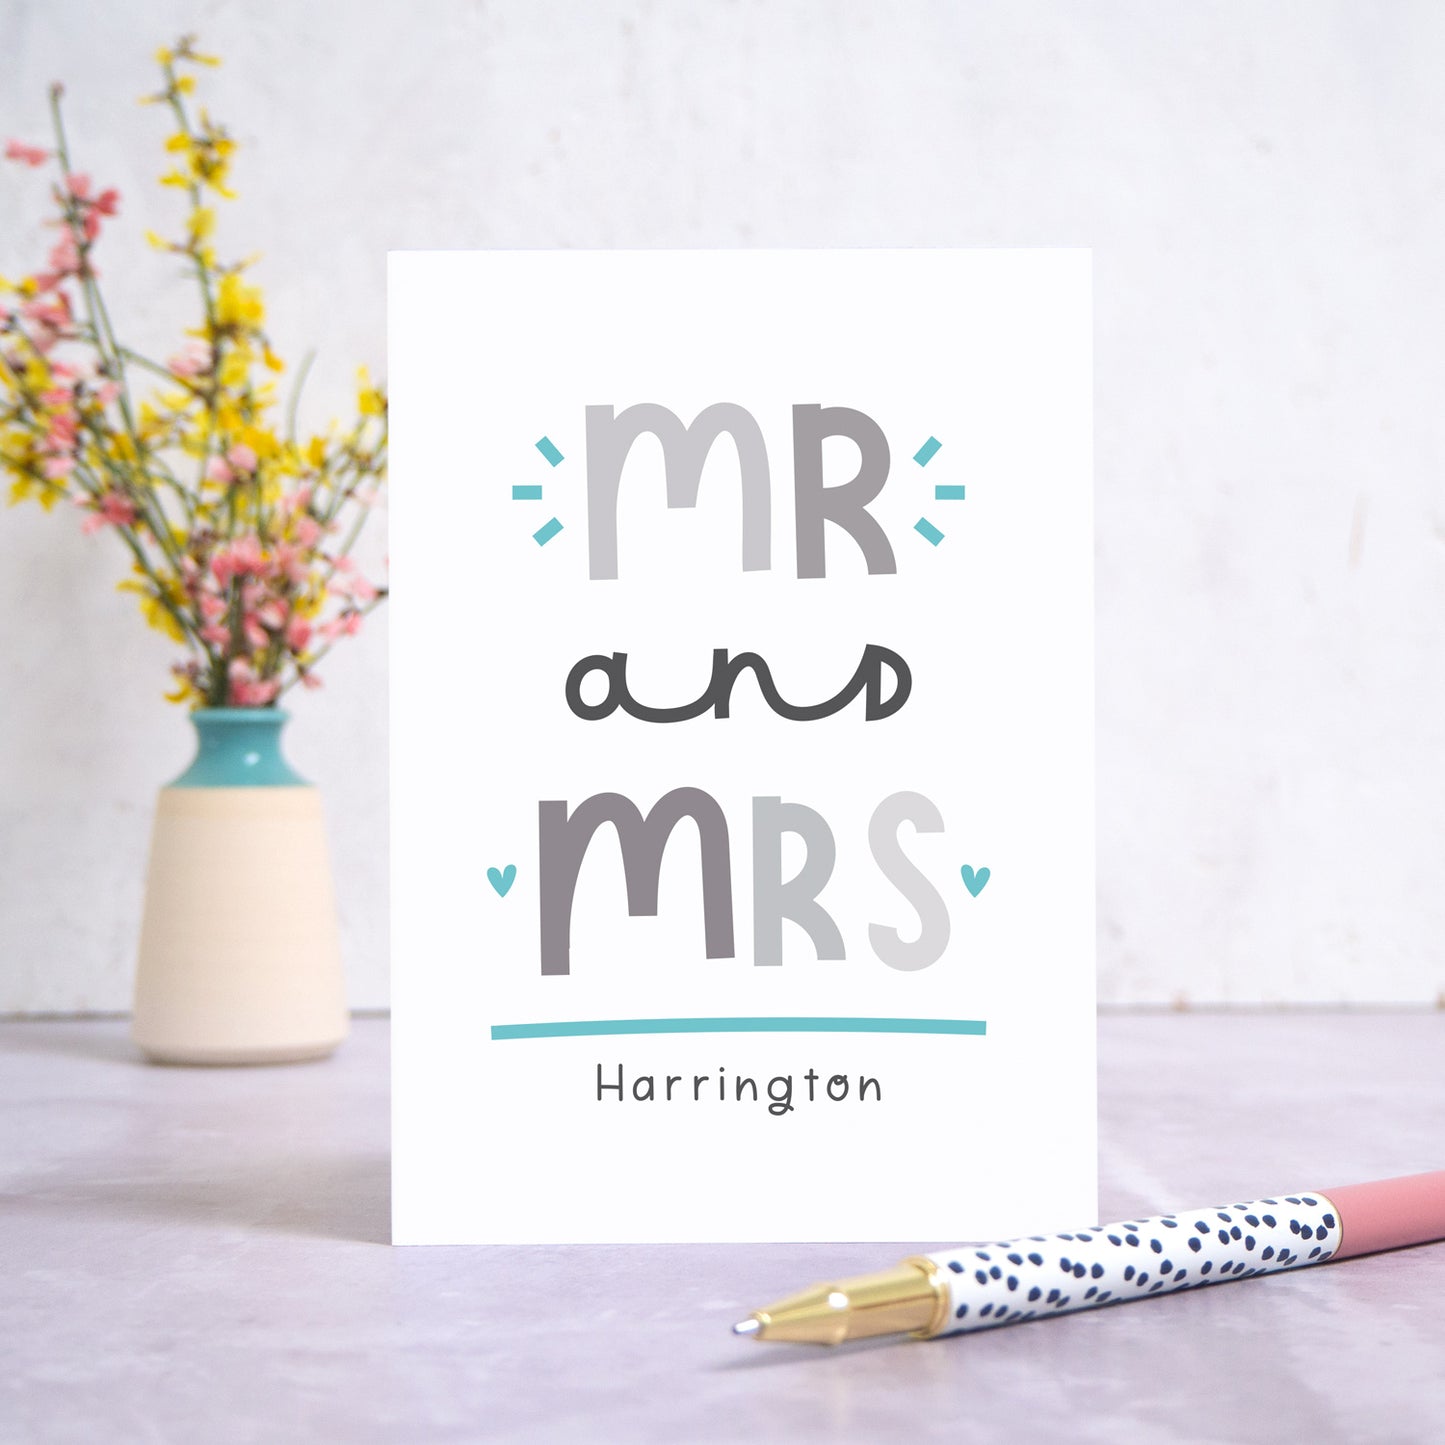 A Mr and Mrs personalised wedding congratulations card stood in front of a white background and a small vase of yellow and pink flowers. There is a white and black spotty pen in the foreground. This is the grey and blue version of the card.